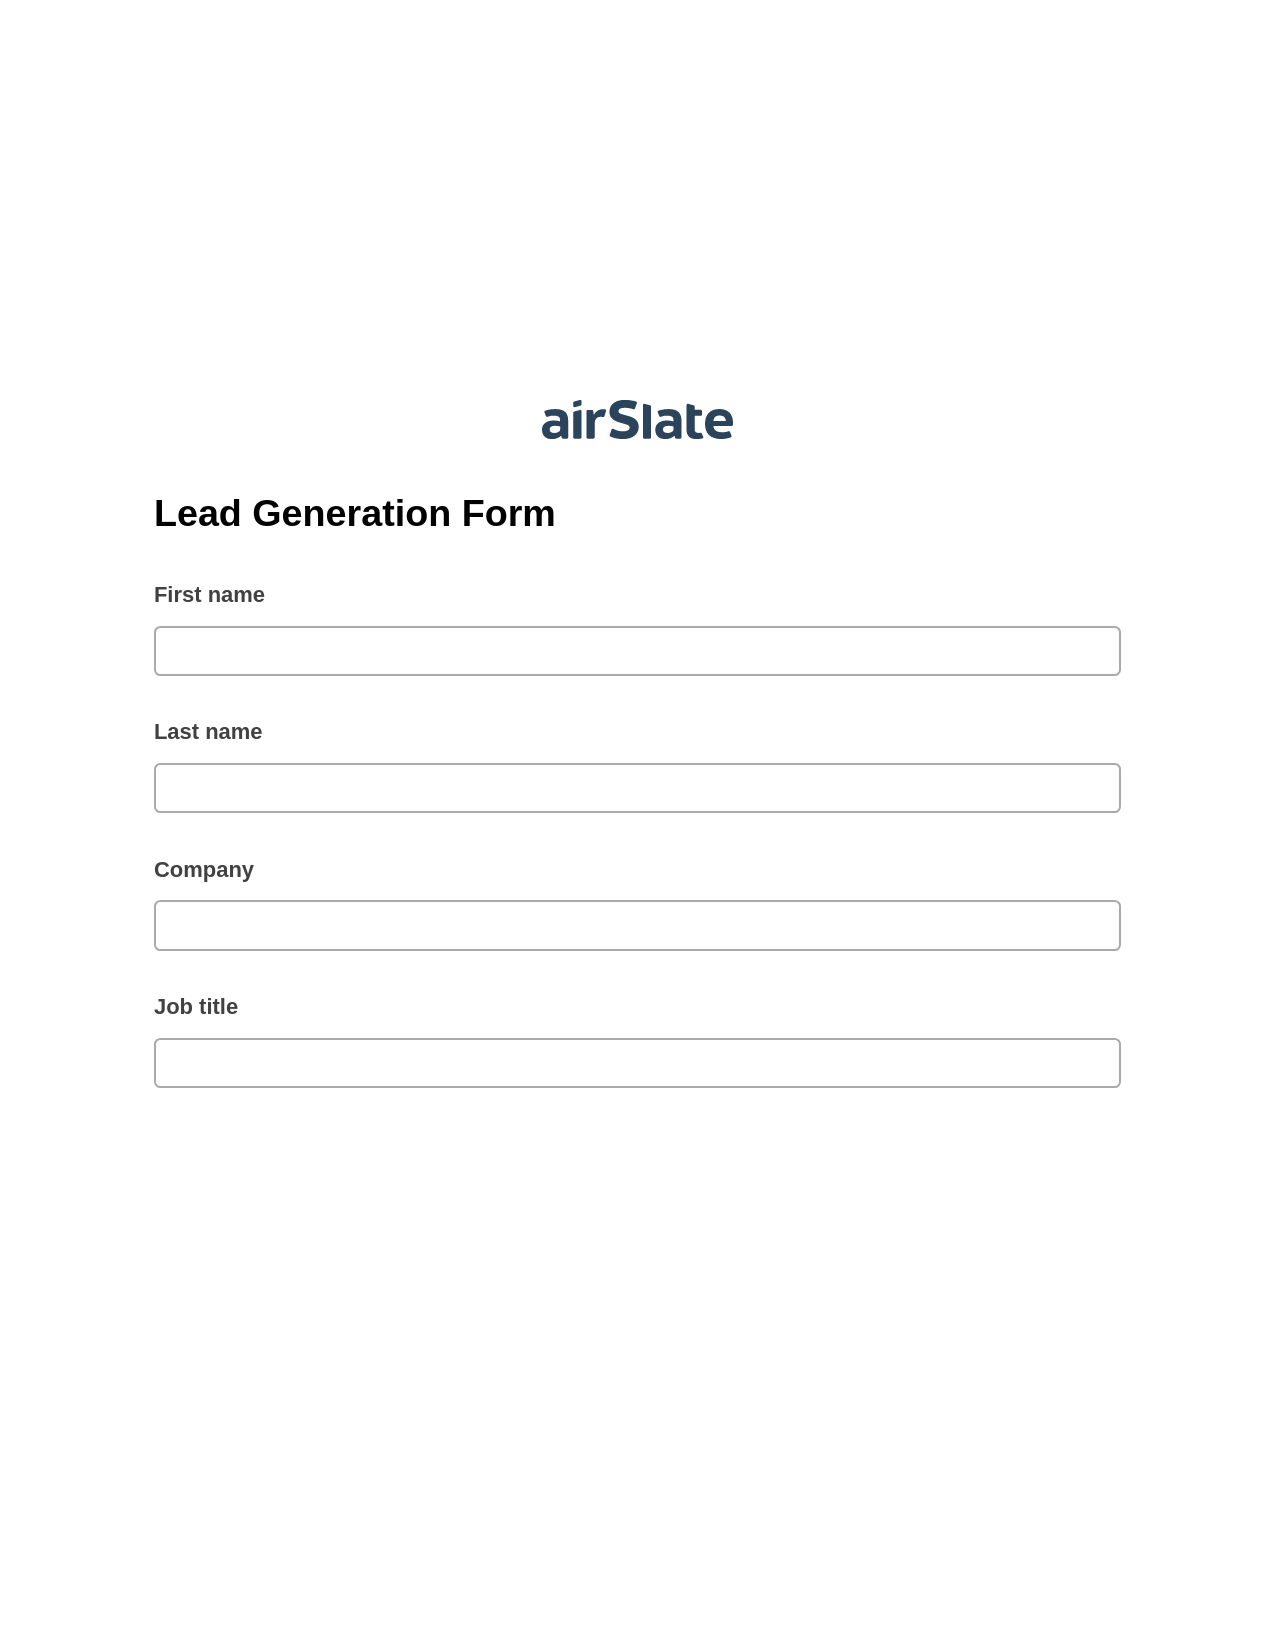 Lead Generation Form Pre-fill from Google Sheets Bot, Roles Reminder Bot, Archive to Box Bot